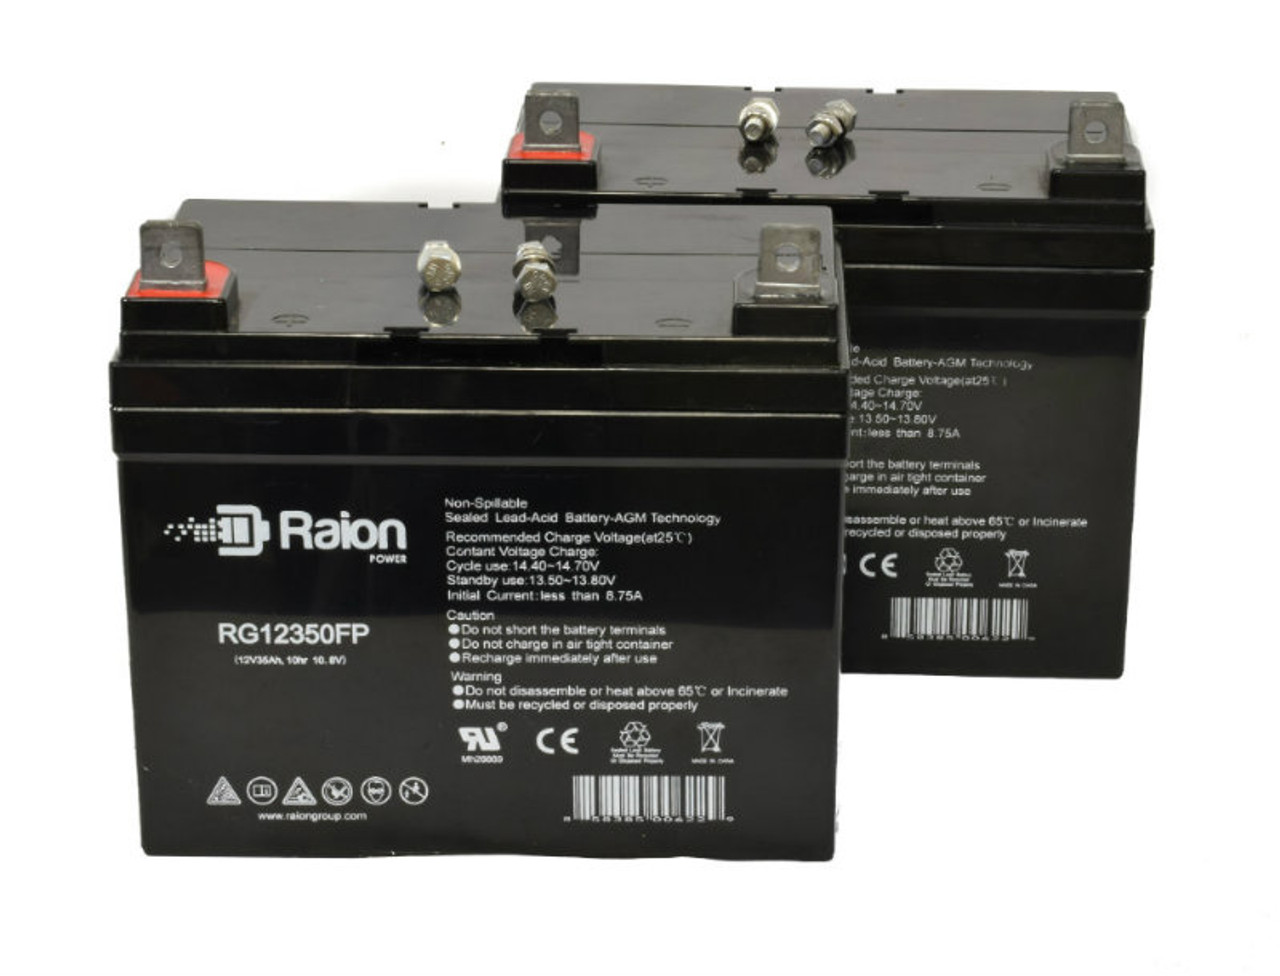 Raion Power Replacement 12V 35Ah Lawn Mower Battery for Ford Motor Co. LT75 - 2 Pack